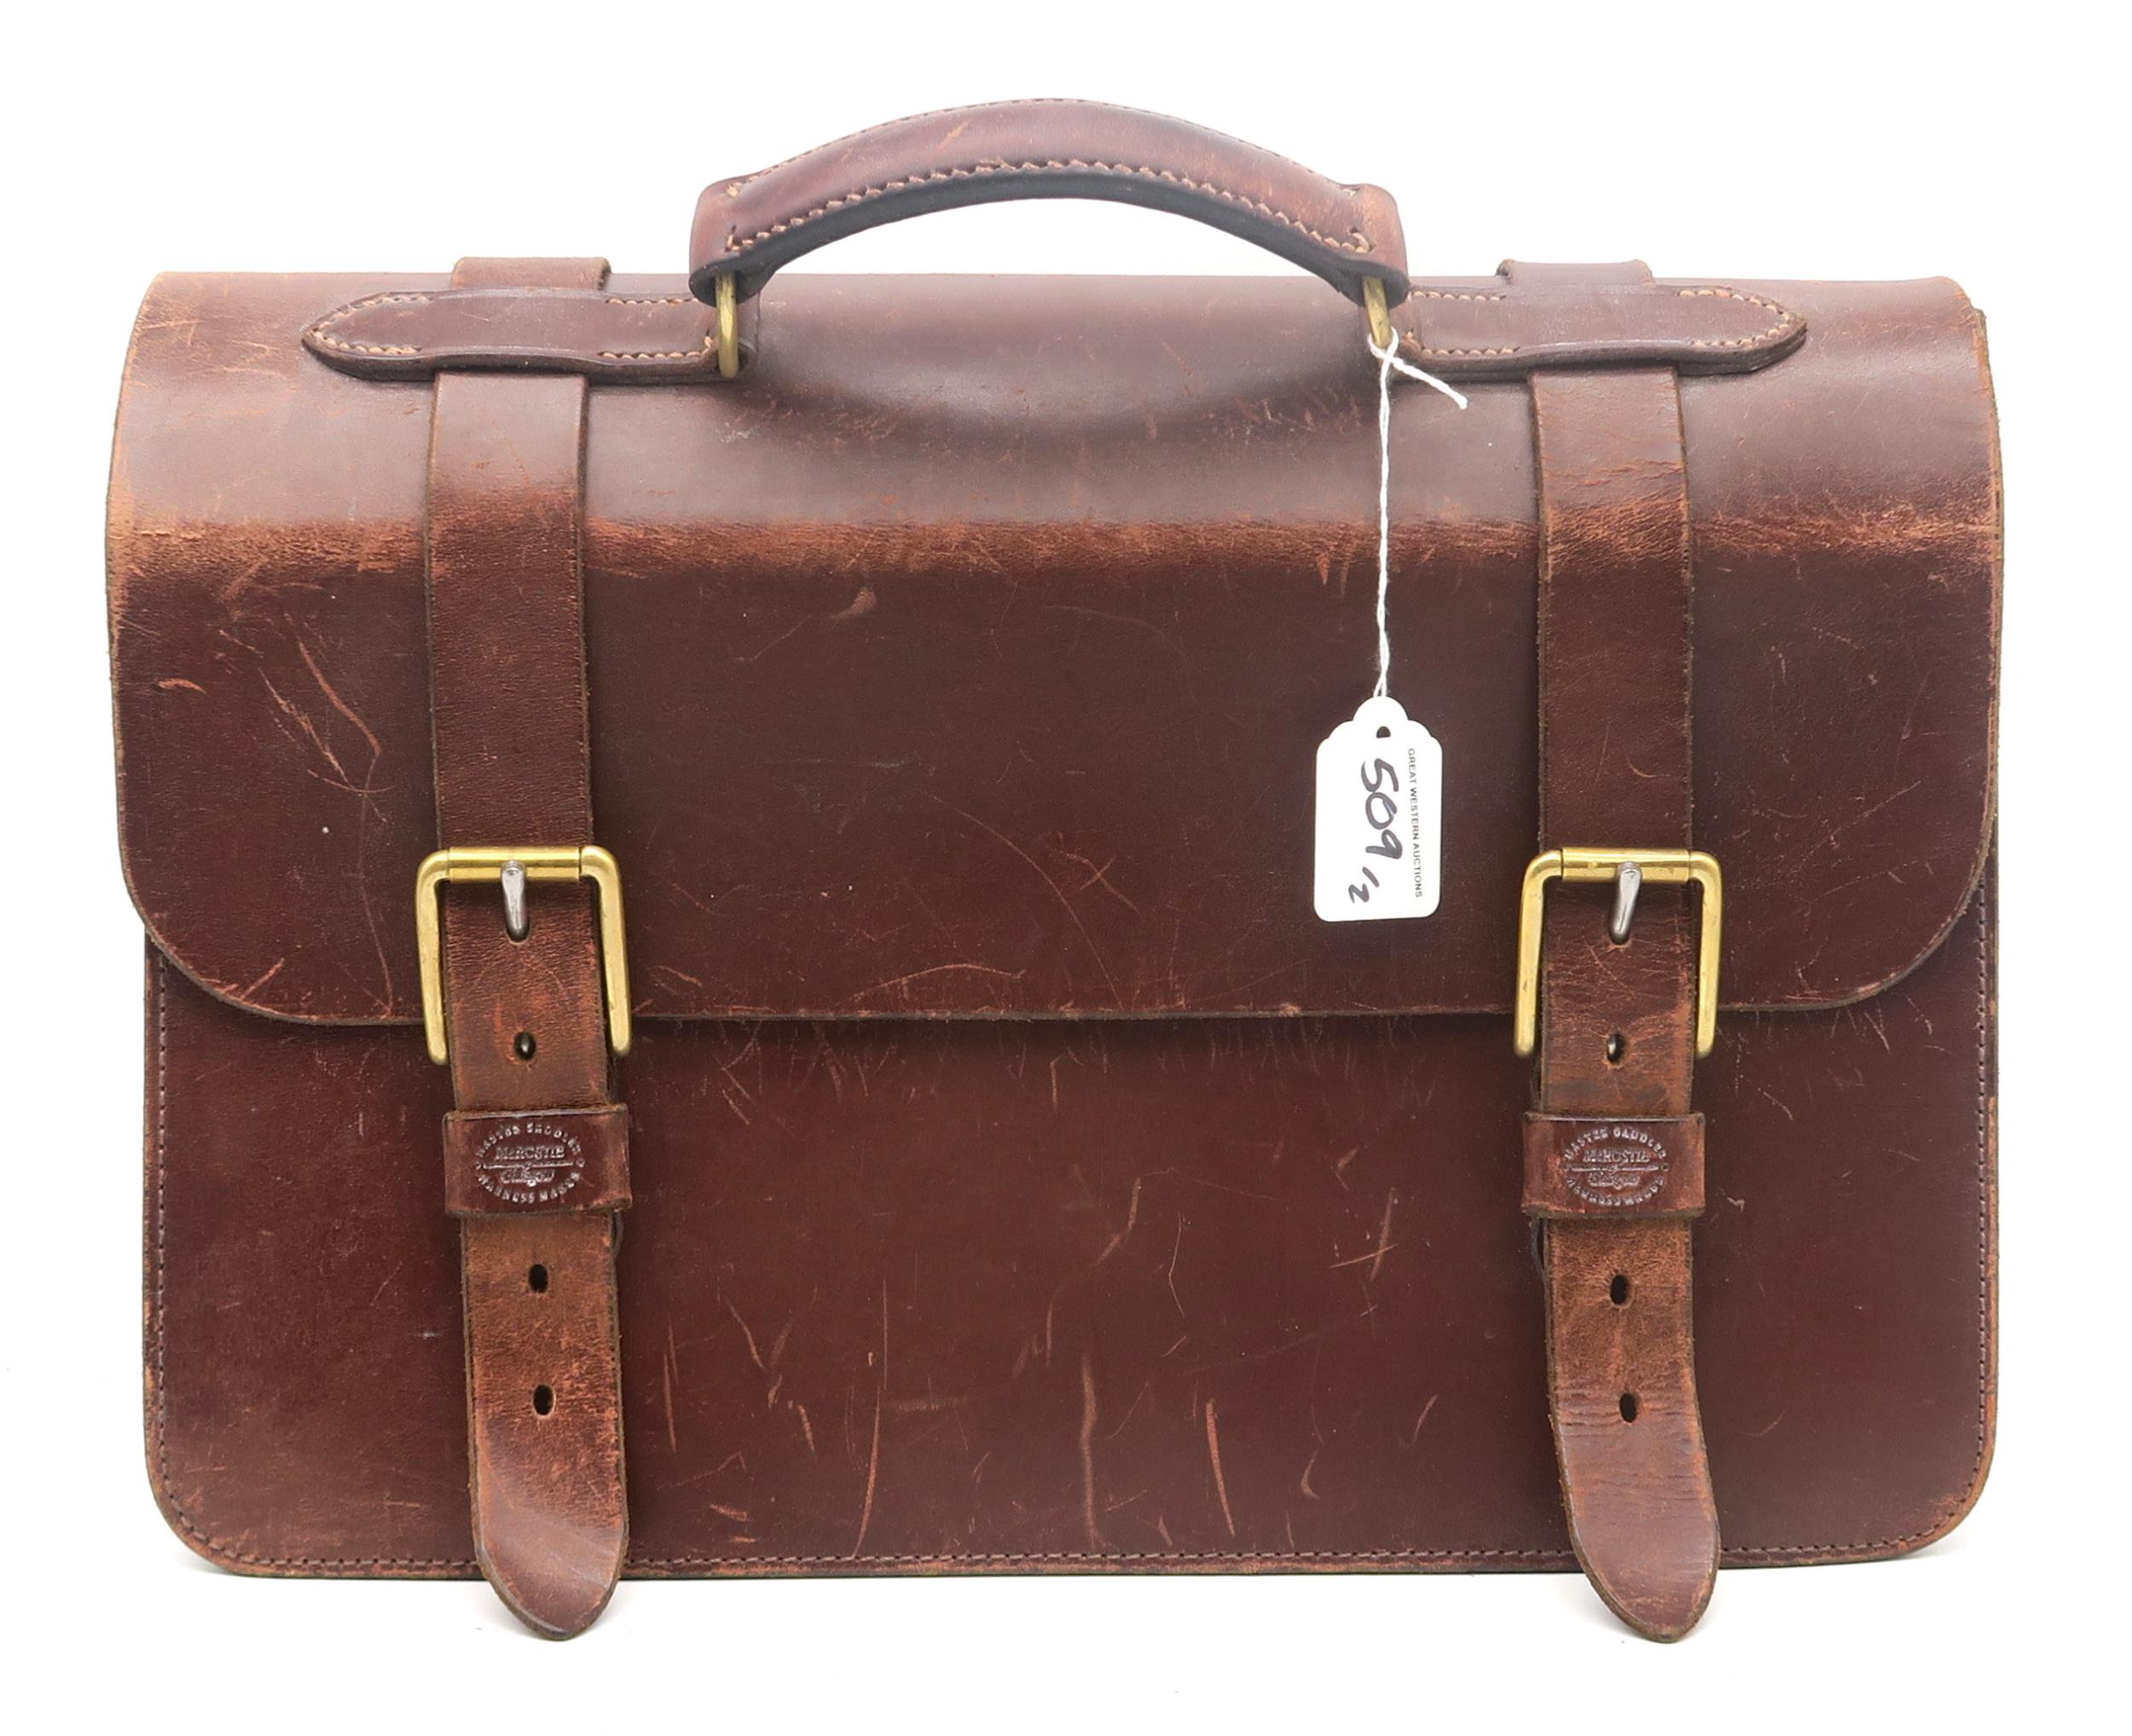 An Officer's Briefcase by Mackenzie Leather of Edinburgh, with another similar by McRostie of - Image 3 of 3